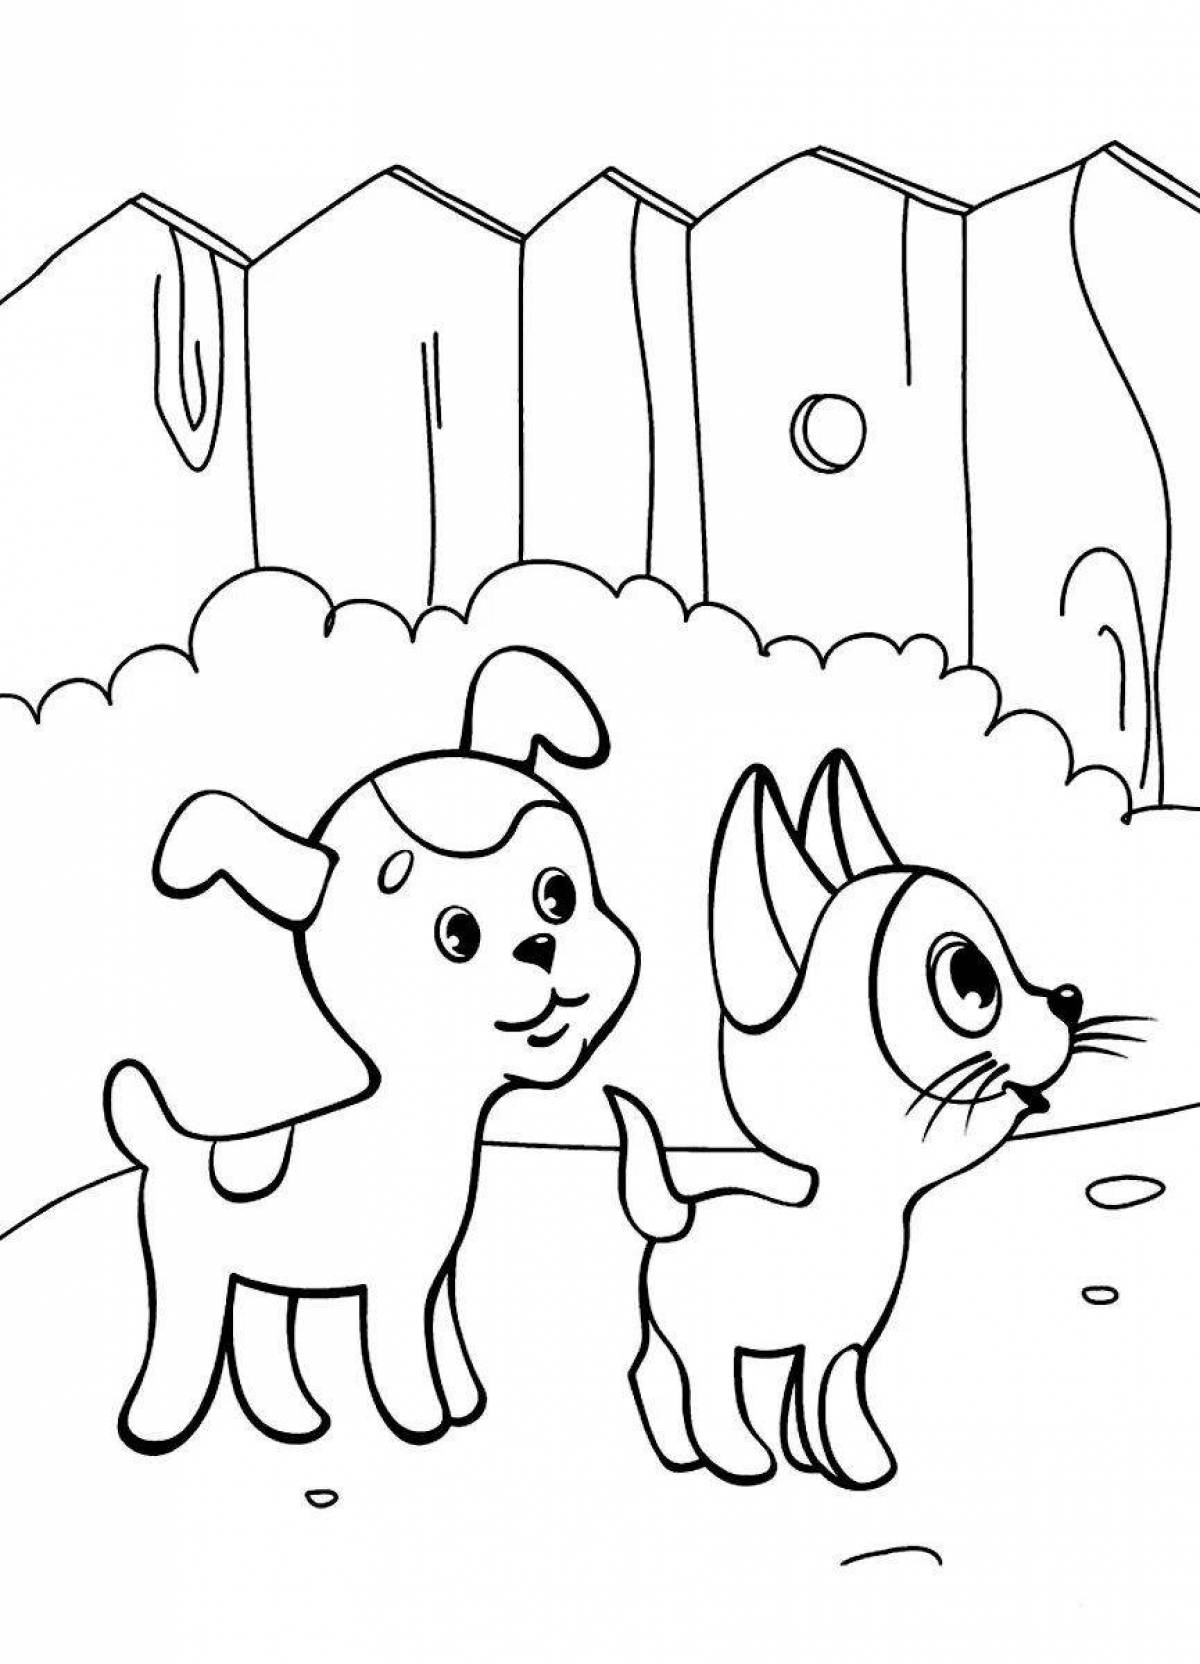 Funny coloring book kittens dogs for children 3 4 years old